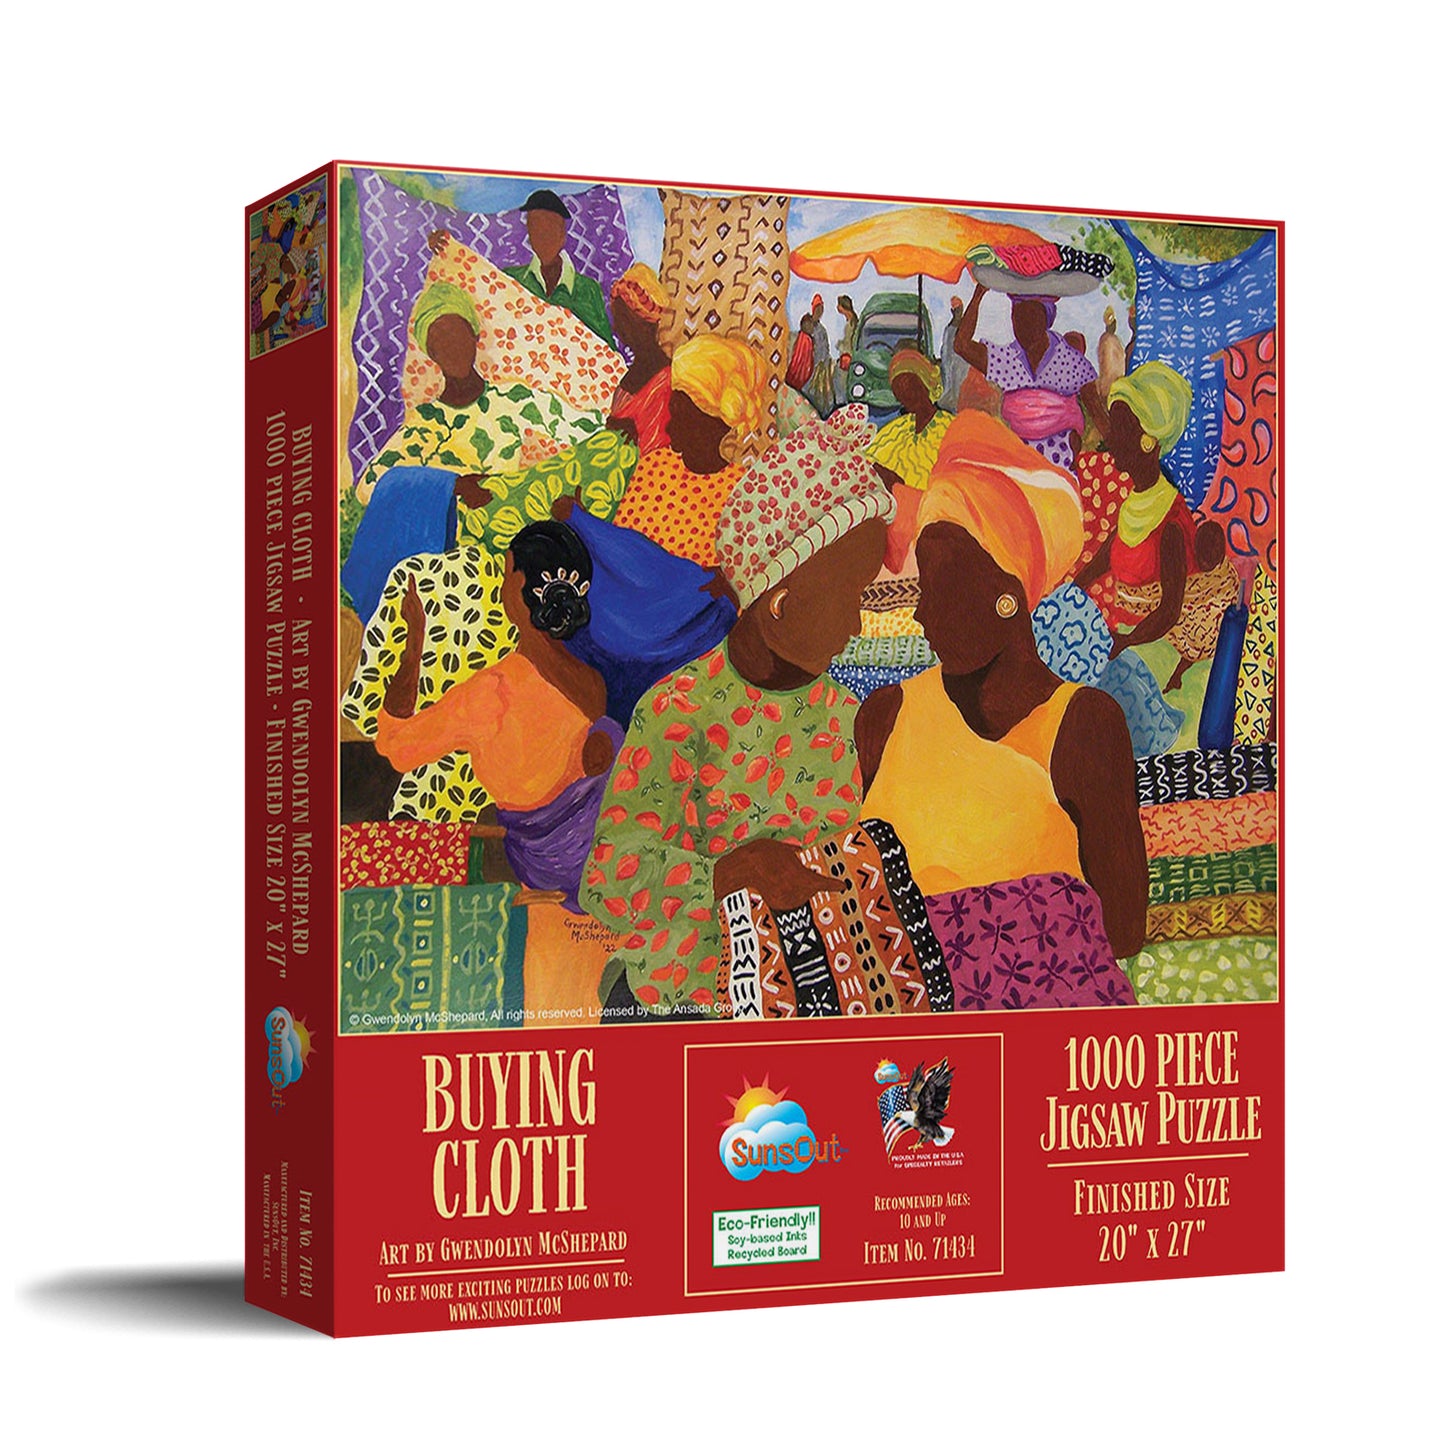 Buying Cloth - 1000 Piece Jigsaw Puzzle